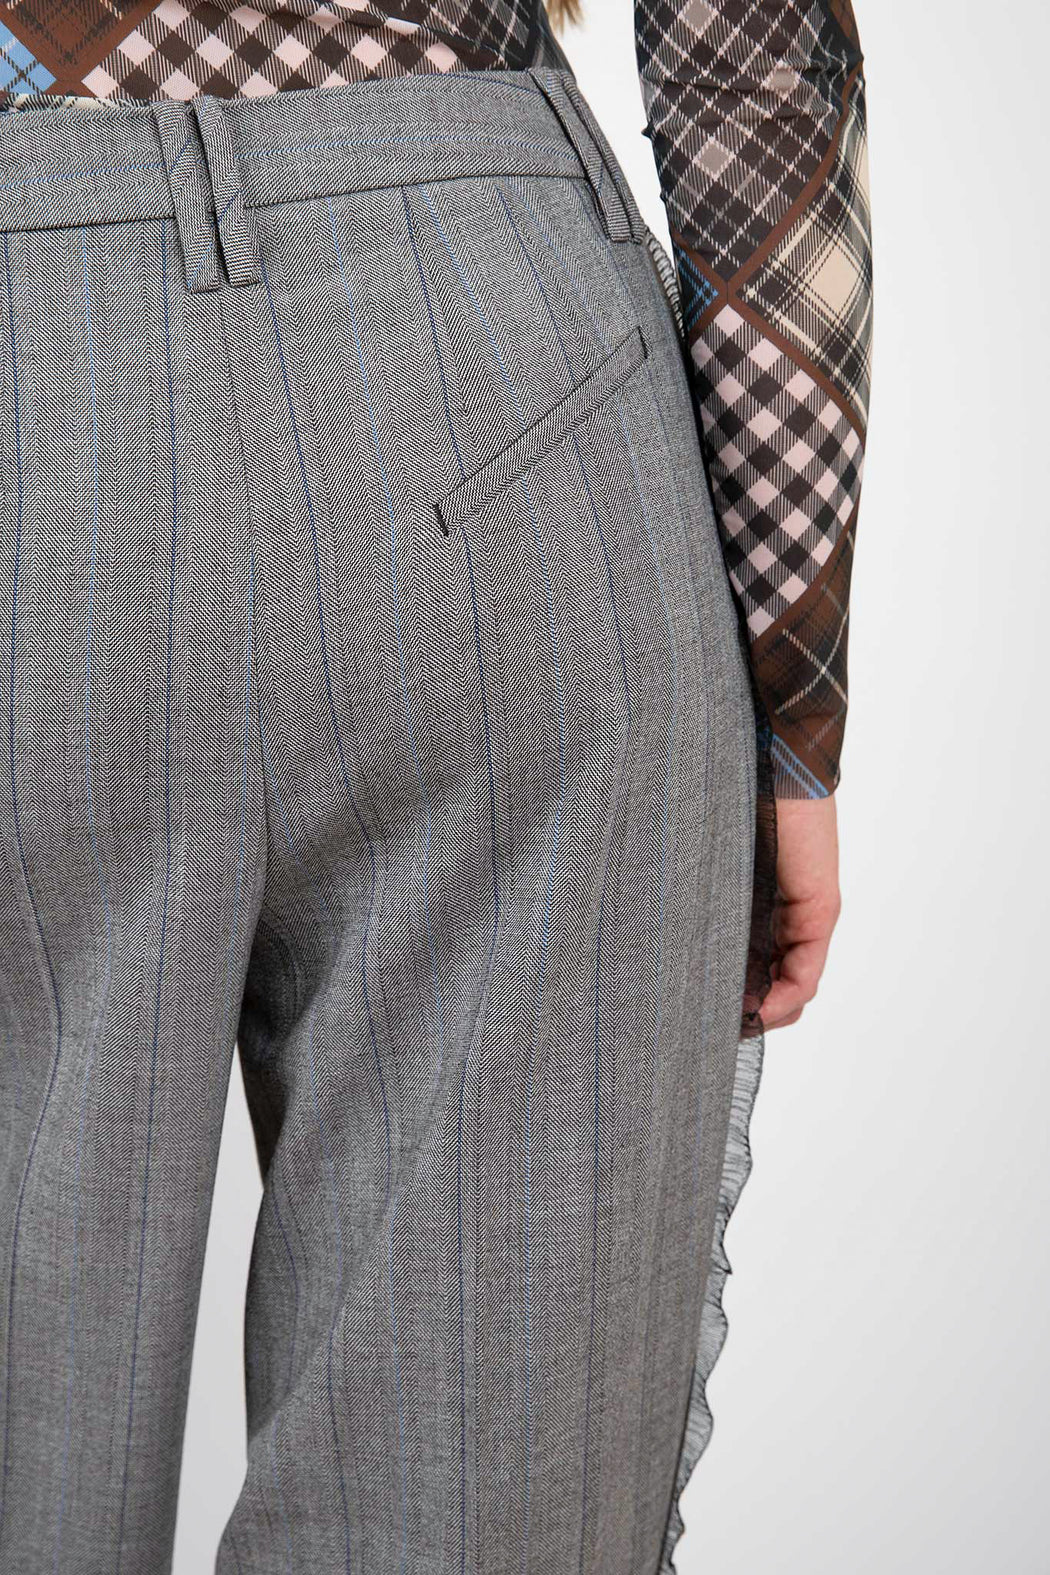 Ganni-Grey-Herringbone-Suiting-Pleated-Trousers-Frost-Gray